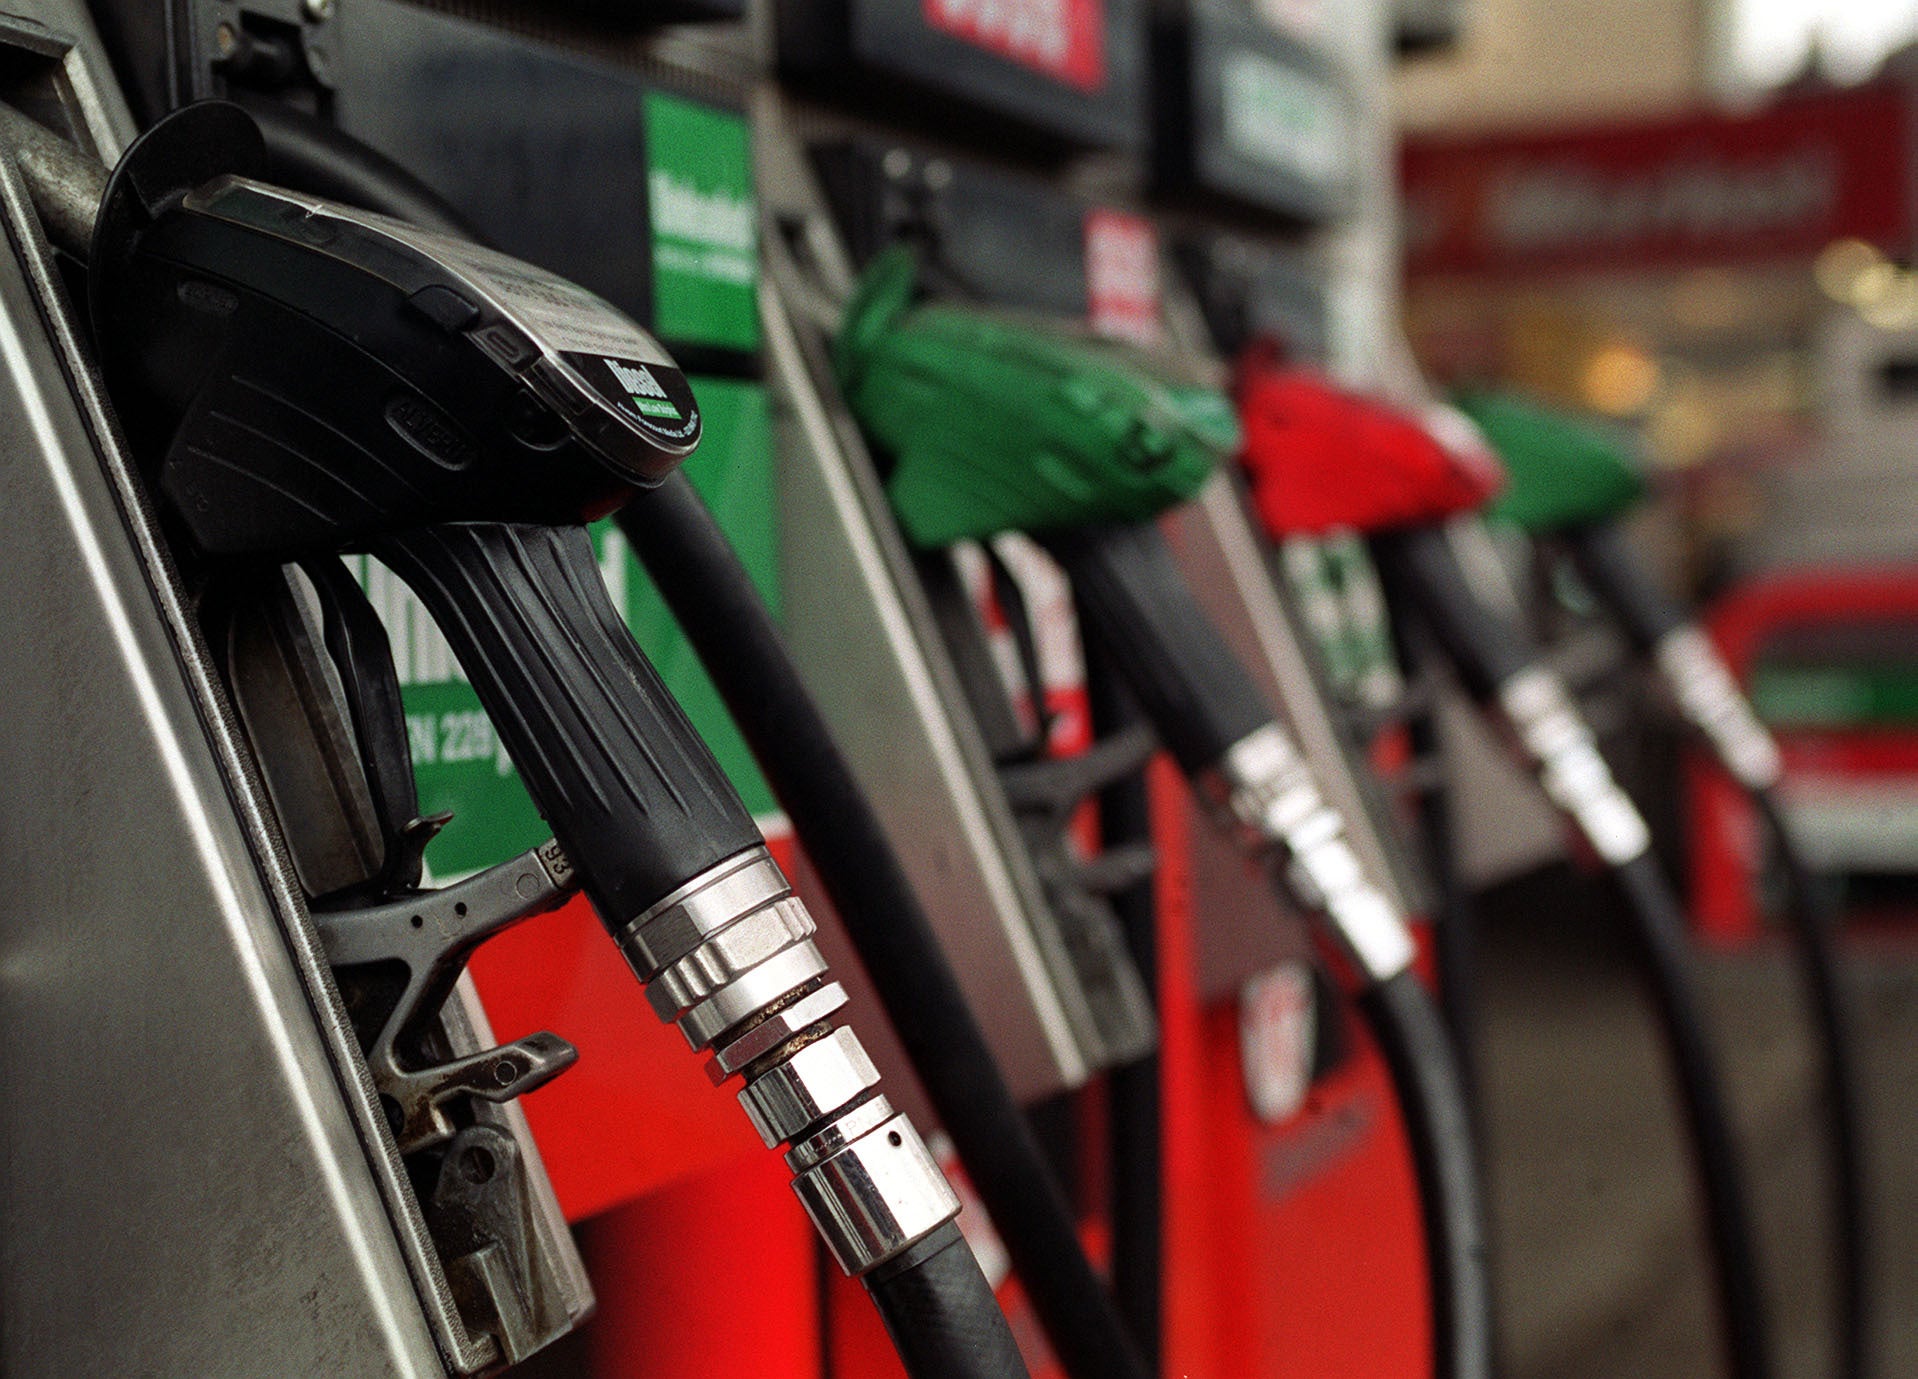 Diesel prices have reached a new high